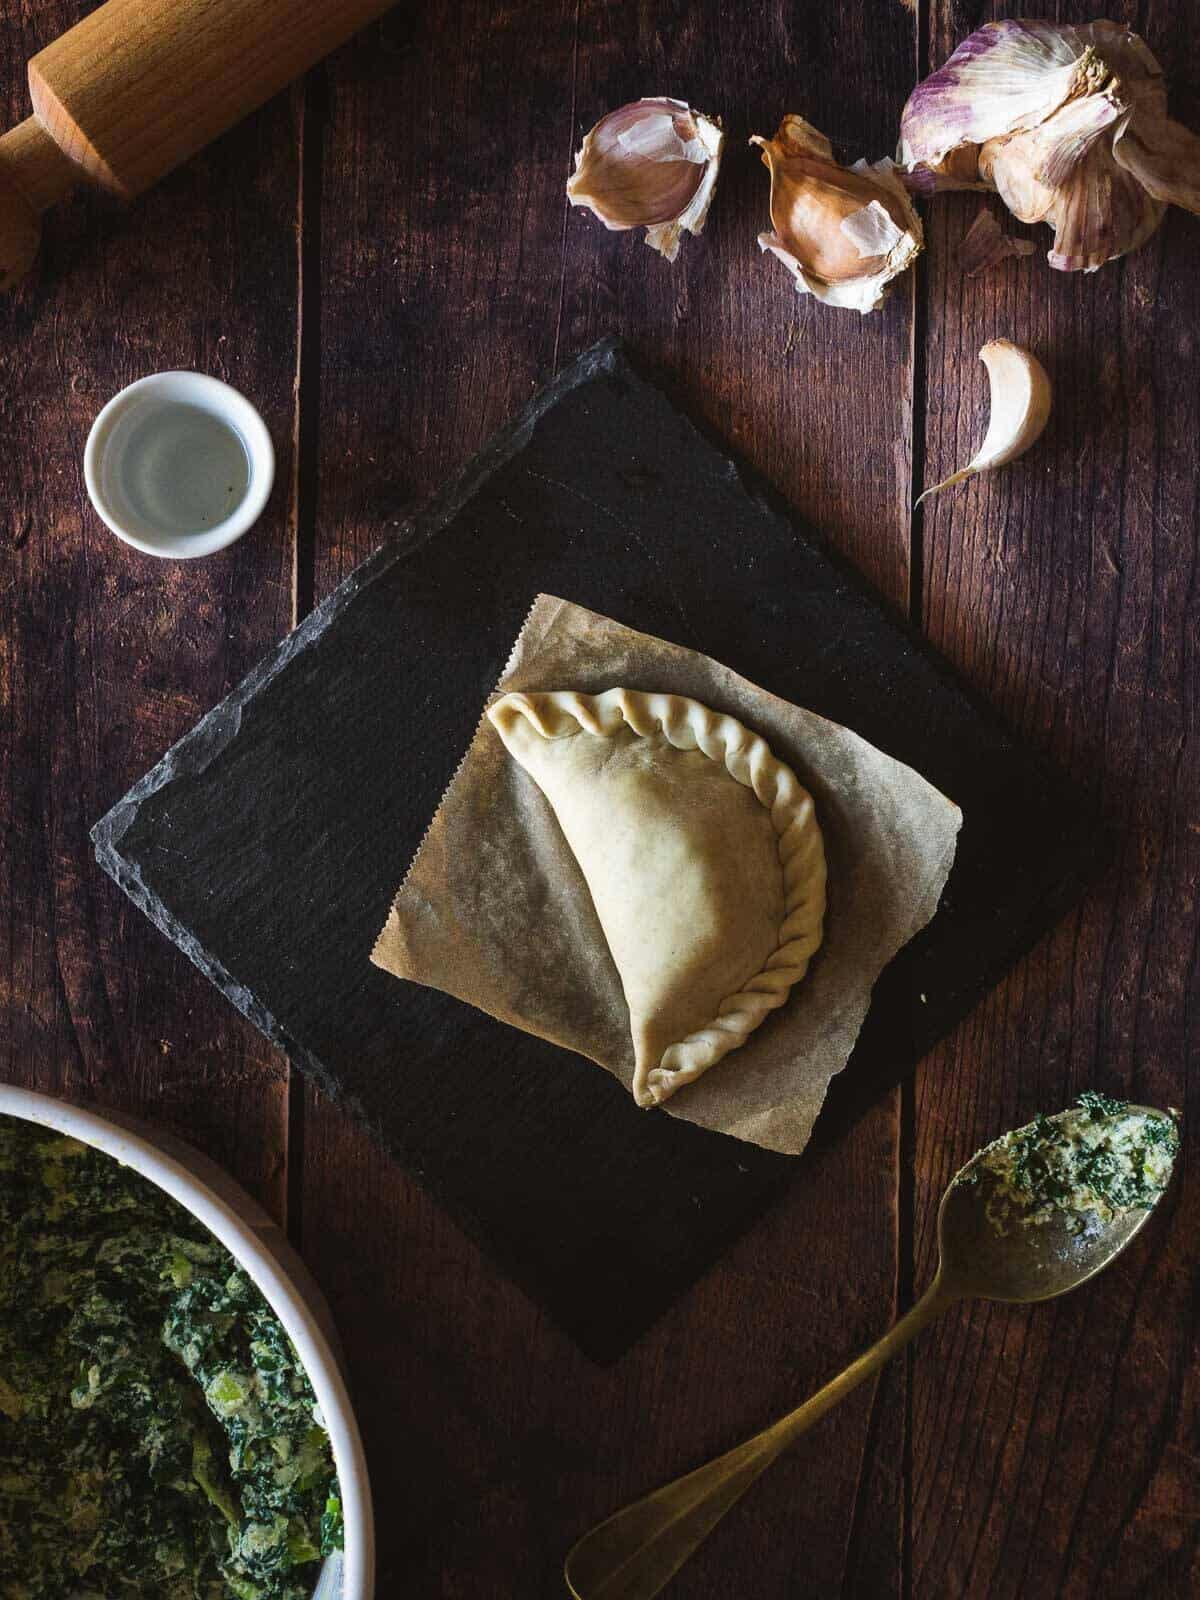 uncooked spinach empanada closed with folding technique over parchment paper with little bowl of water to get fingers wet